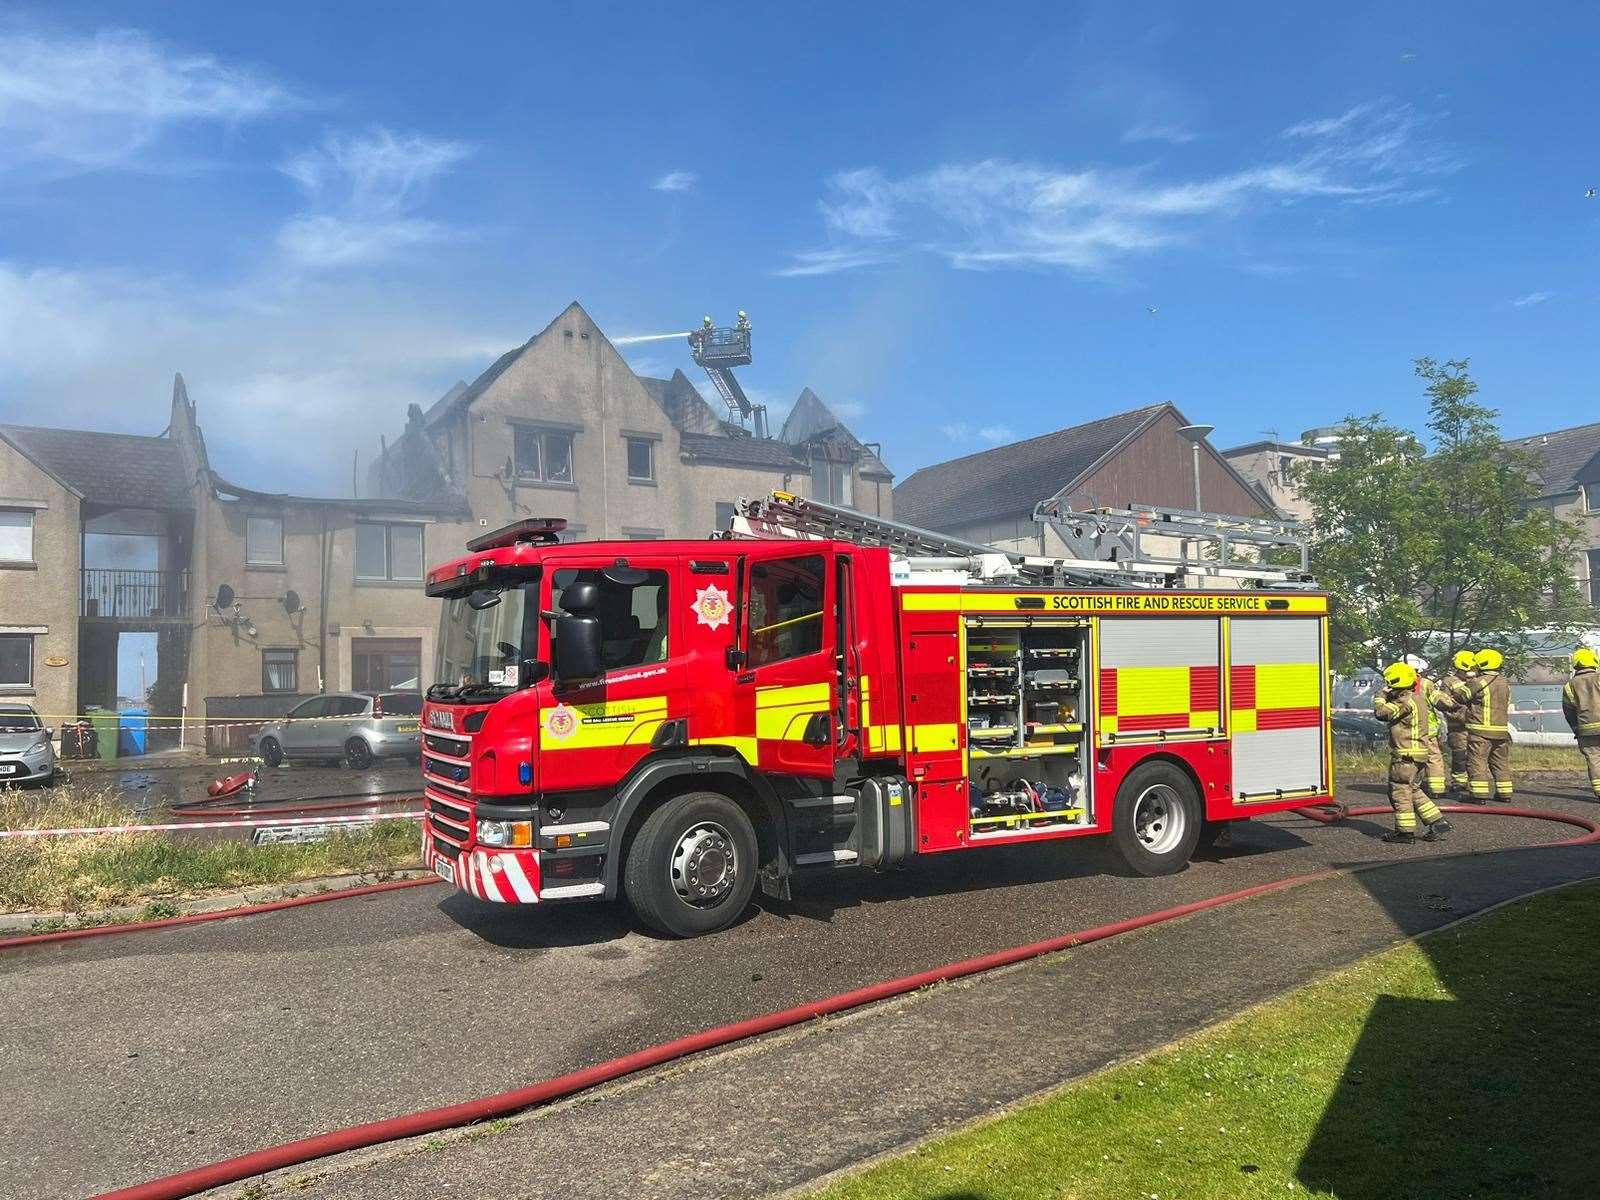 Fire appliances on scene at the blaze in Nairn.